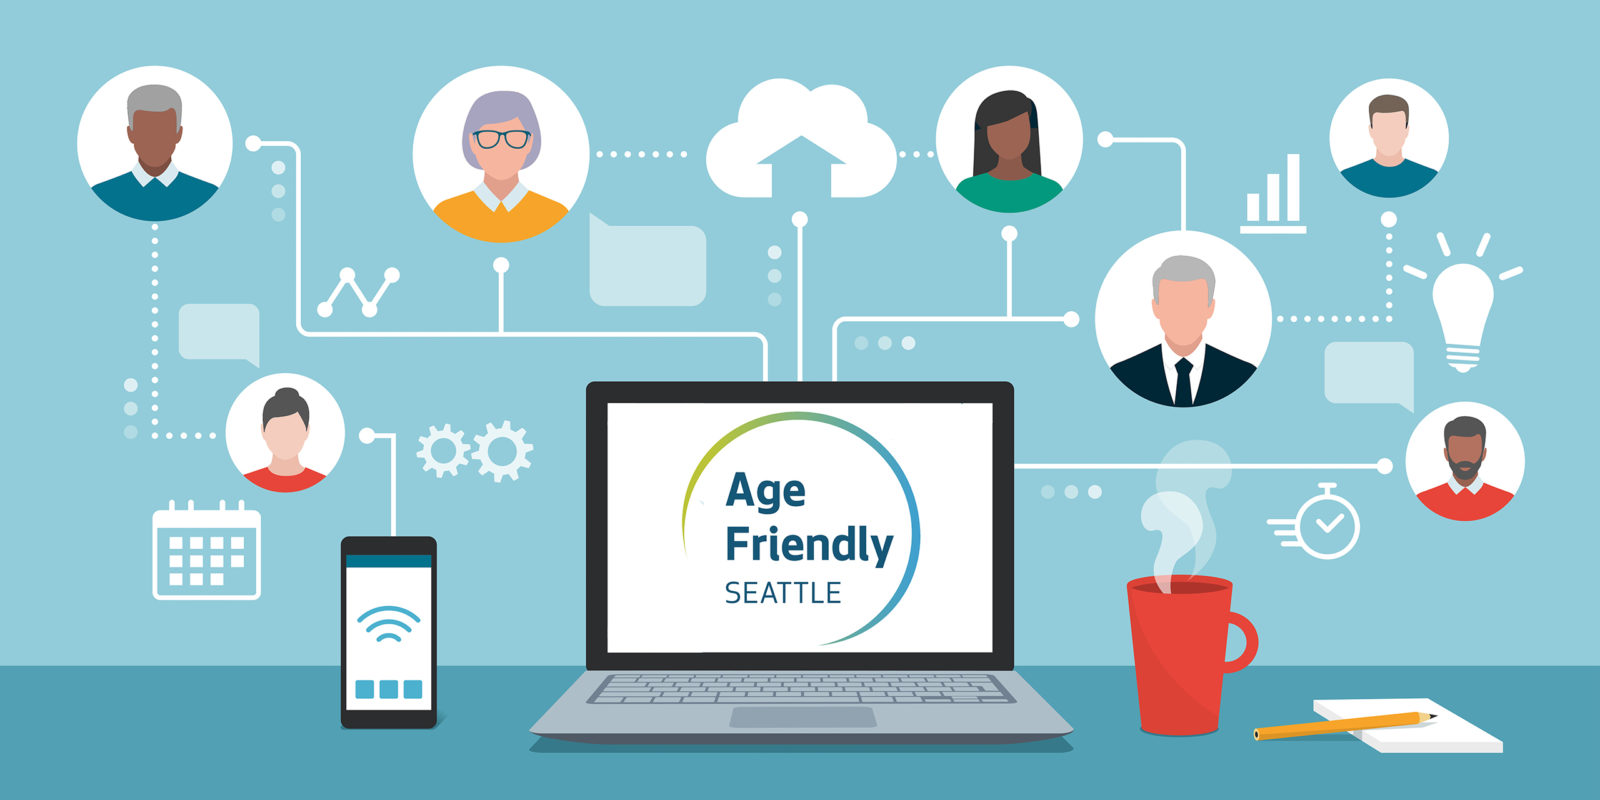 graphic image of open laptop with Age Friendly Seattle logo on the screen, nearby coffee cup and smart phone, and lines connecting people of different ages and races plus symbols such as a lightbulb, gears, charts and graphs